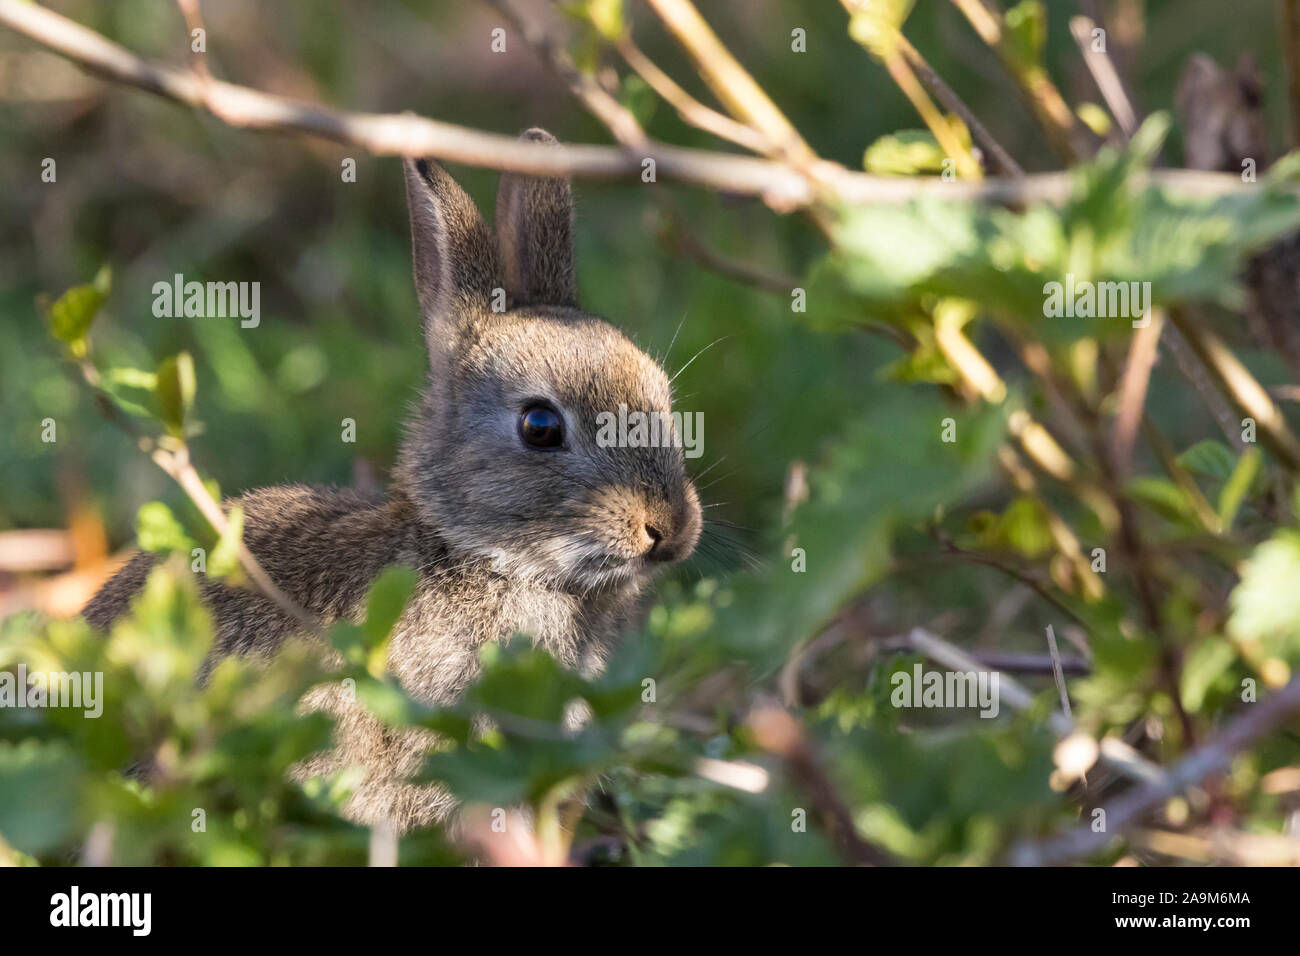 Close up cute wild baby UK rabbit (Oryctolagus cuniculus) isolated outdoors hiding in UK woodland undergrowth, peeping out from shadows. Easter bunny. Stock Photo